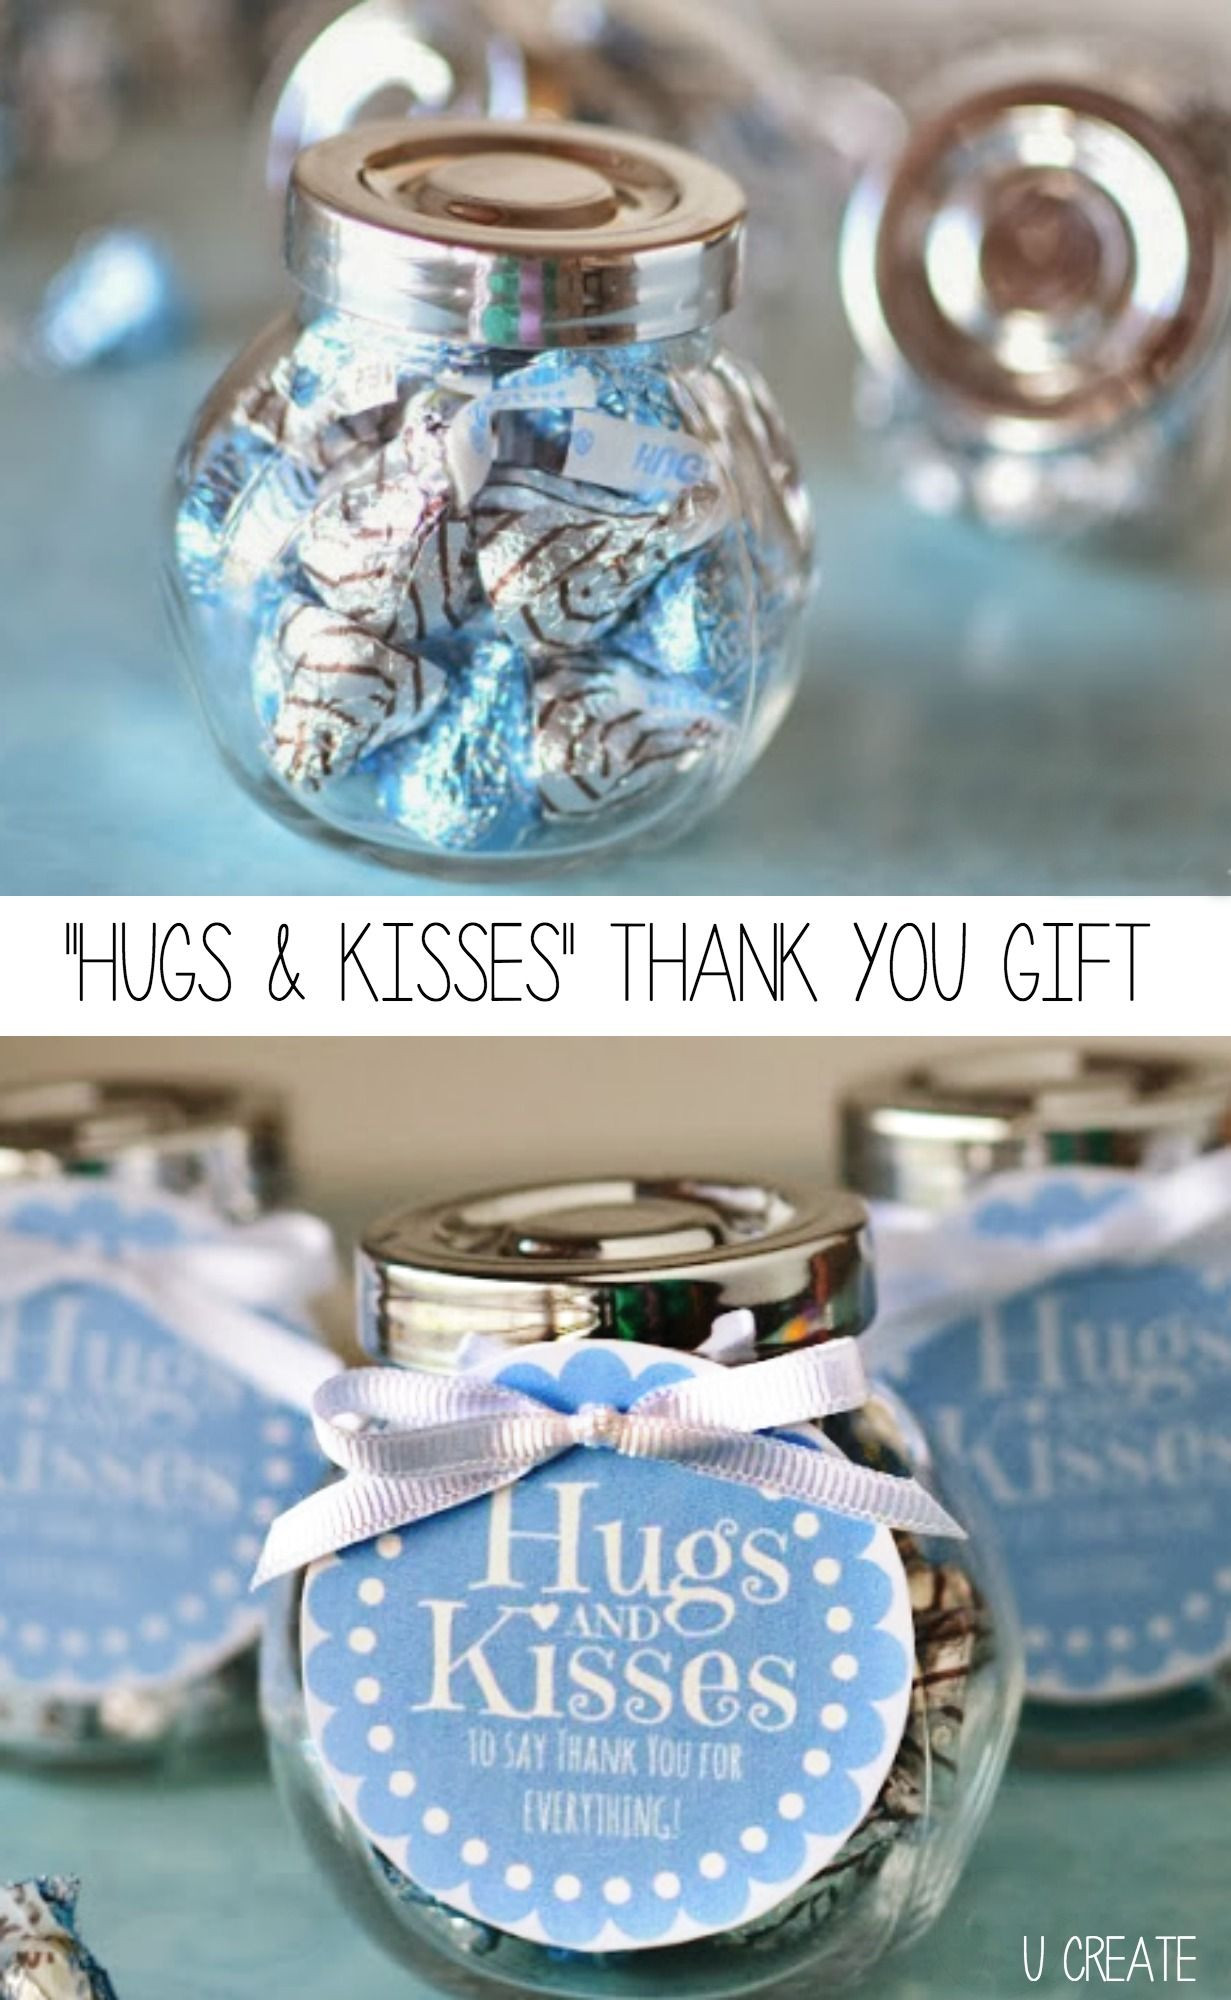 Big Thank You Gift Ideas
 Hugs and Kisses Thank You Jar with a free printable tag